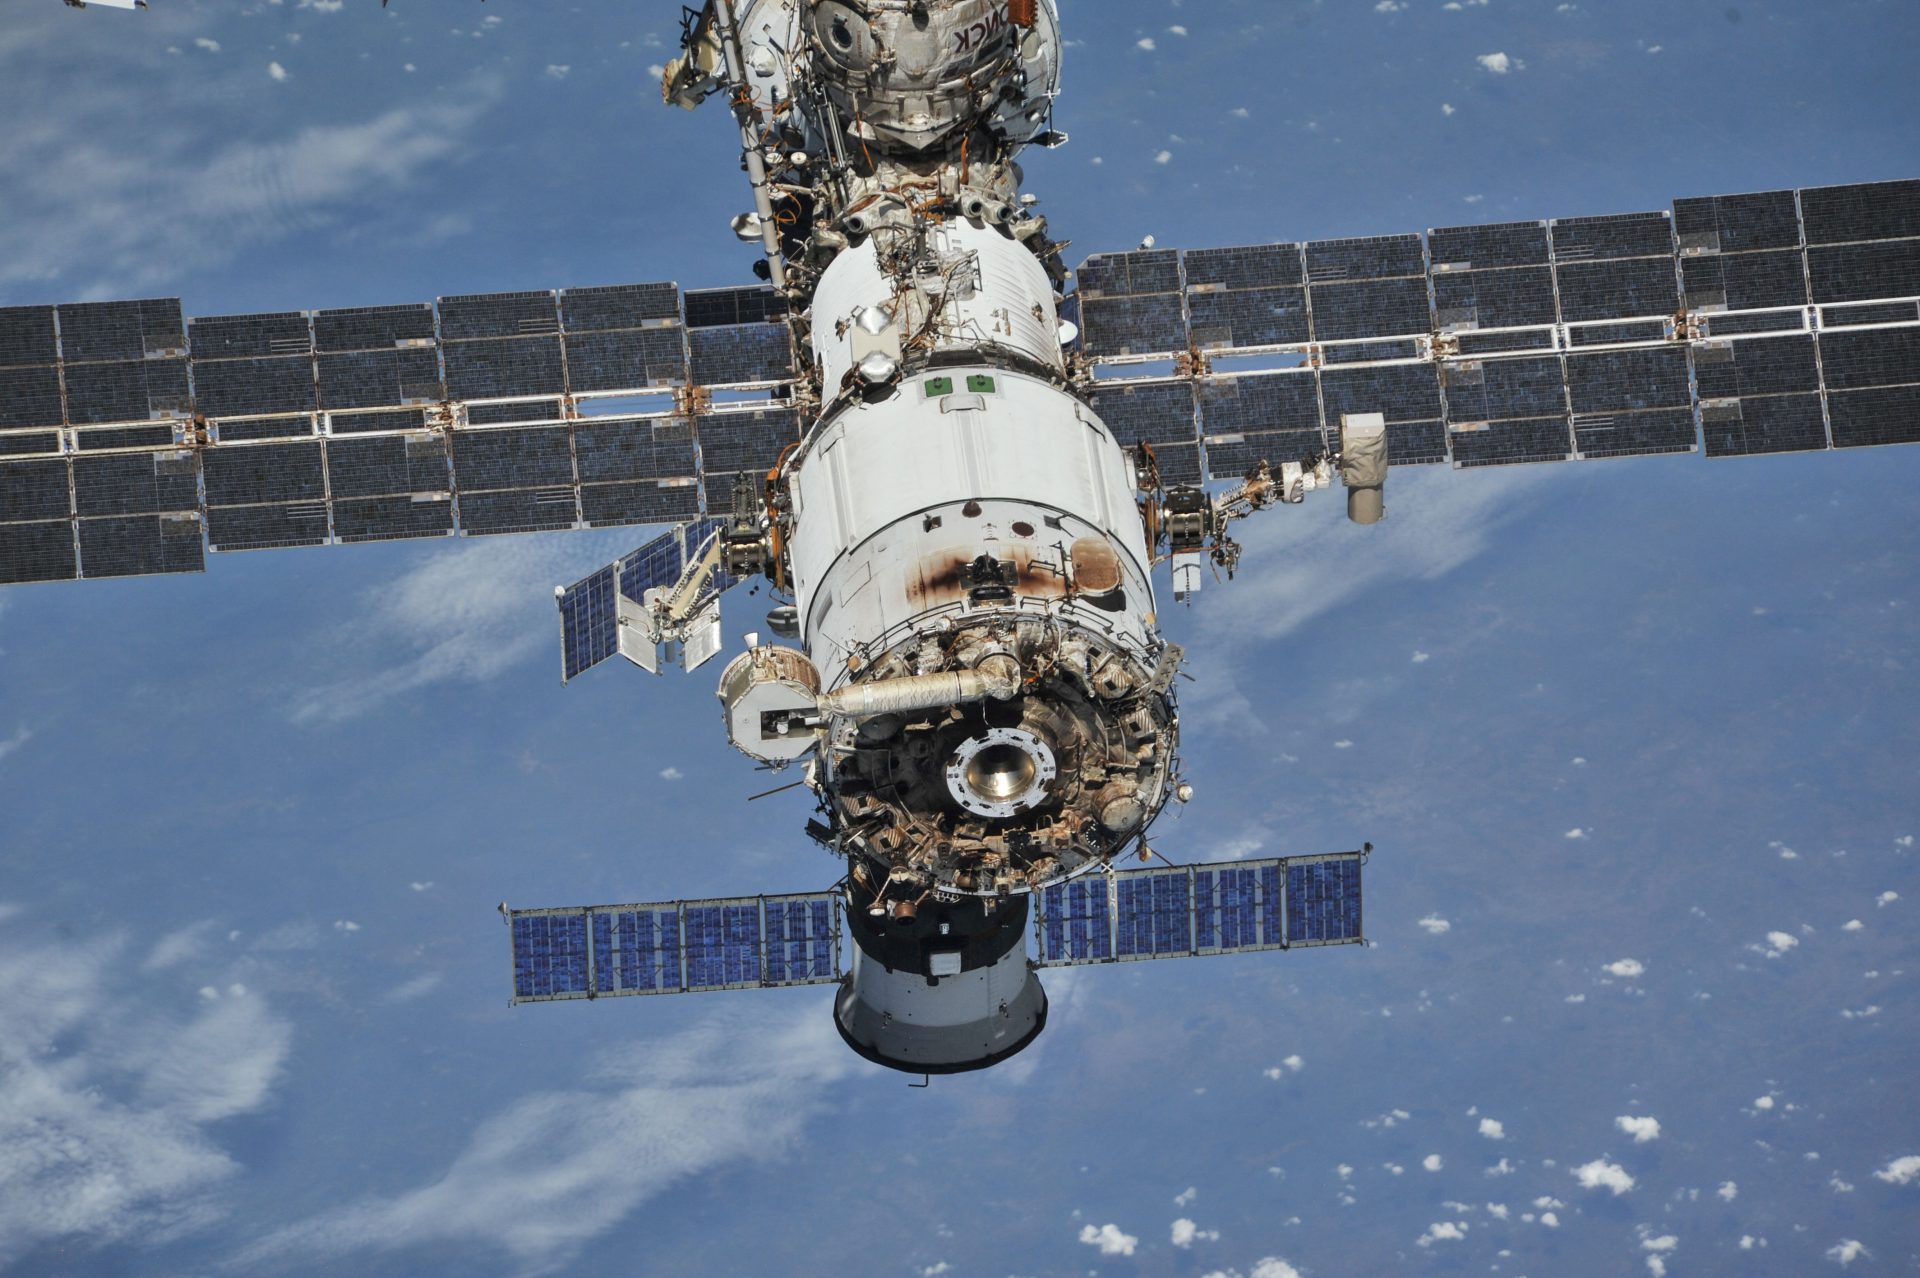 BRICS Alliance to Build a Space Station?